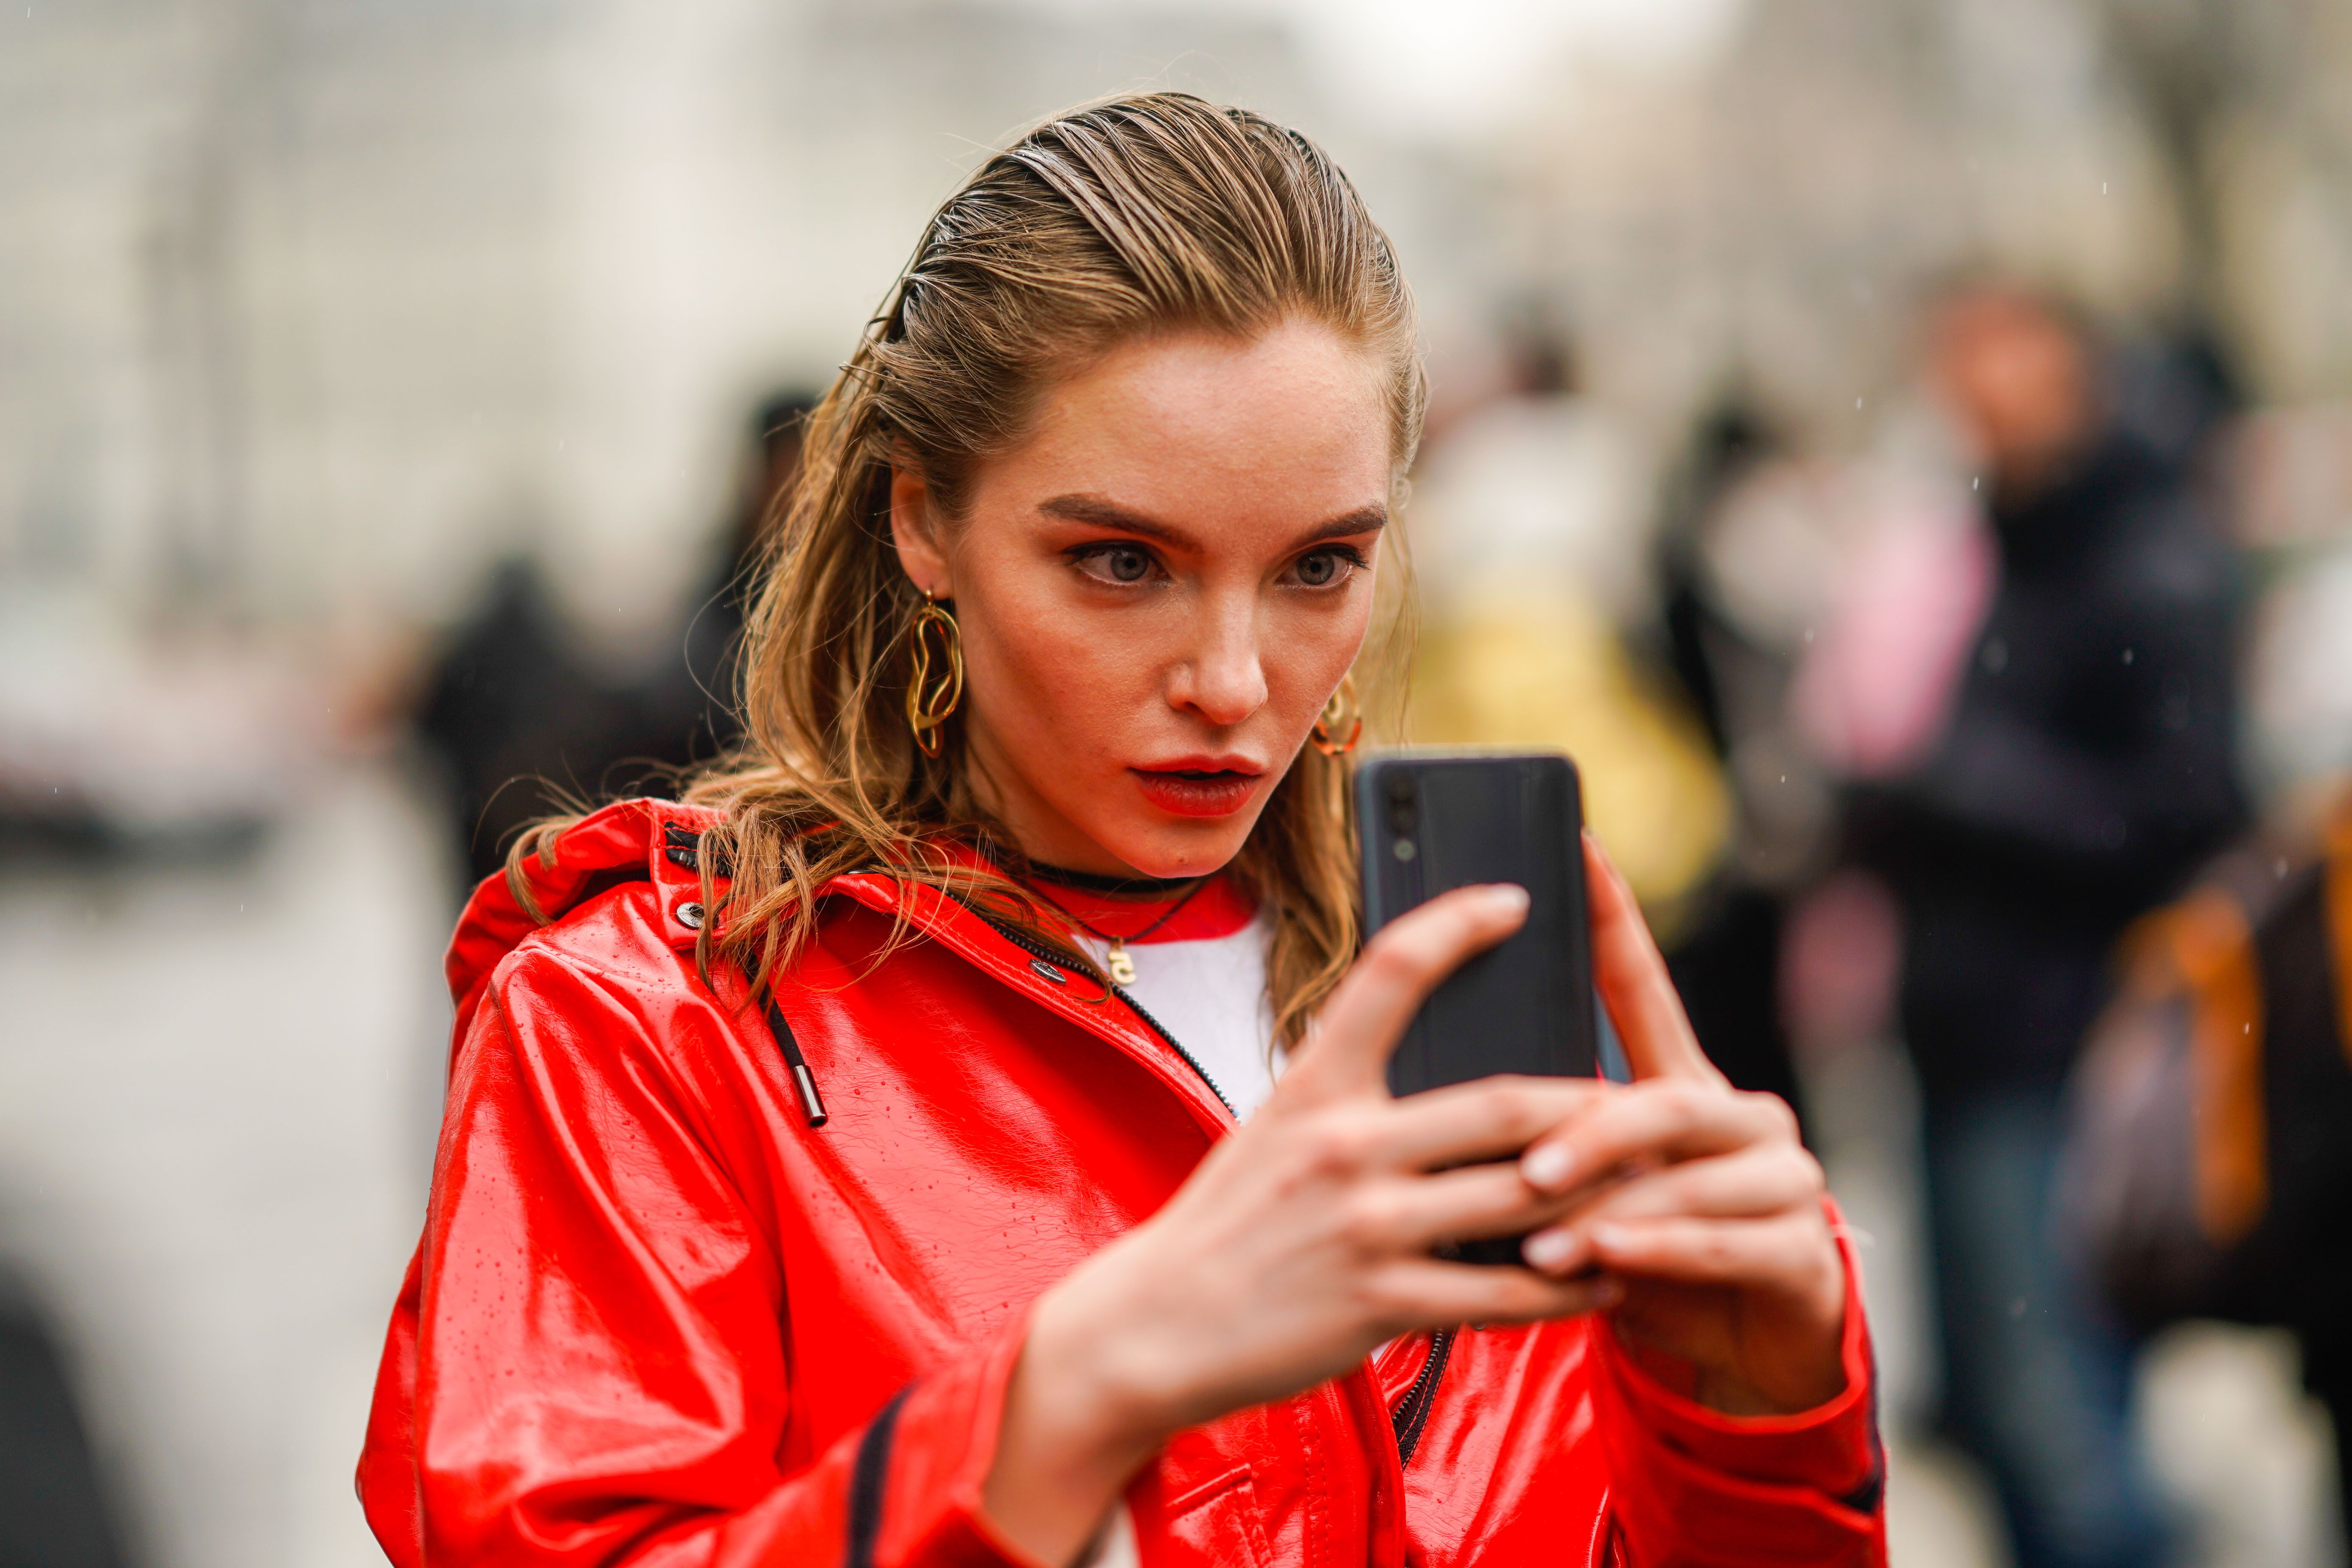 Face, Red, Street fashion, Beauty, Blond, Fashion, Hairstyle, Lip, Technology, Smile, 